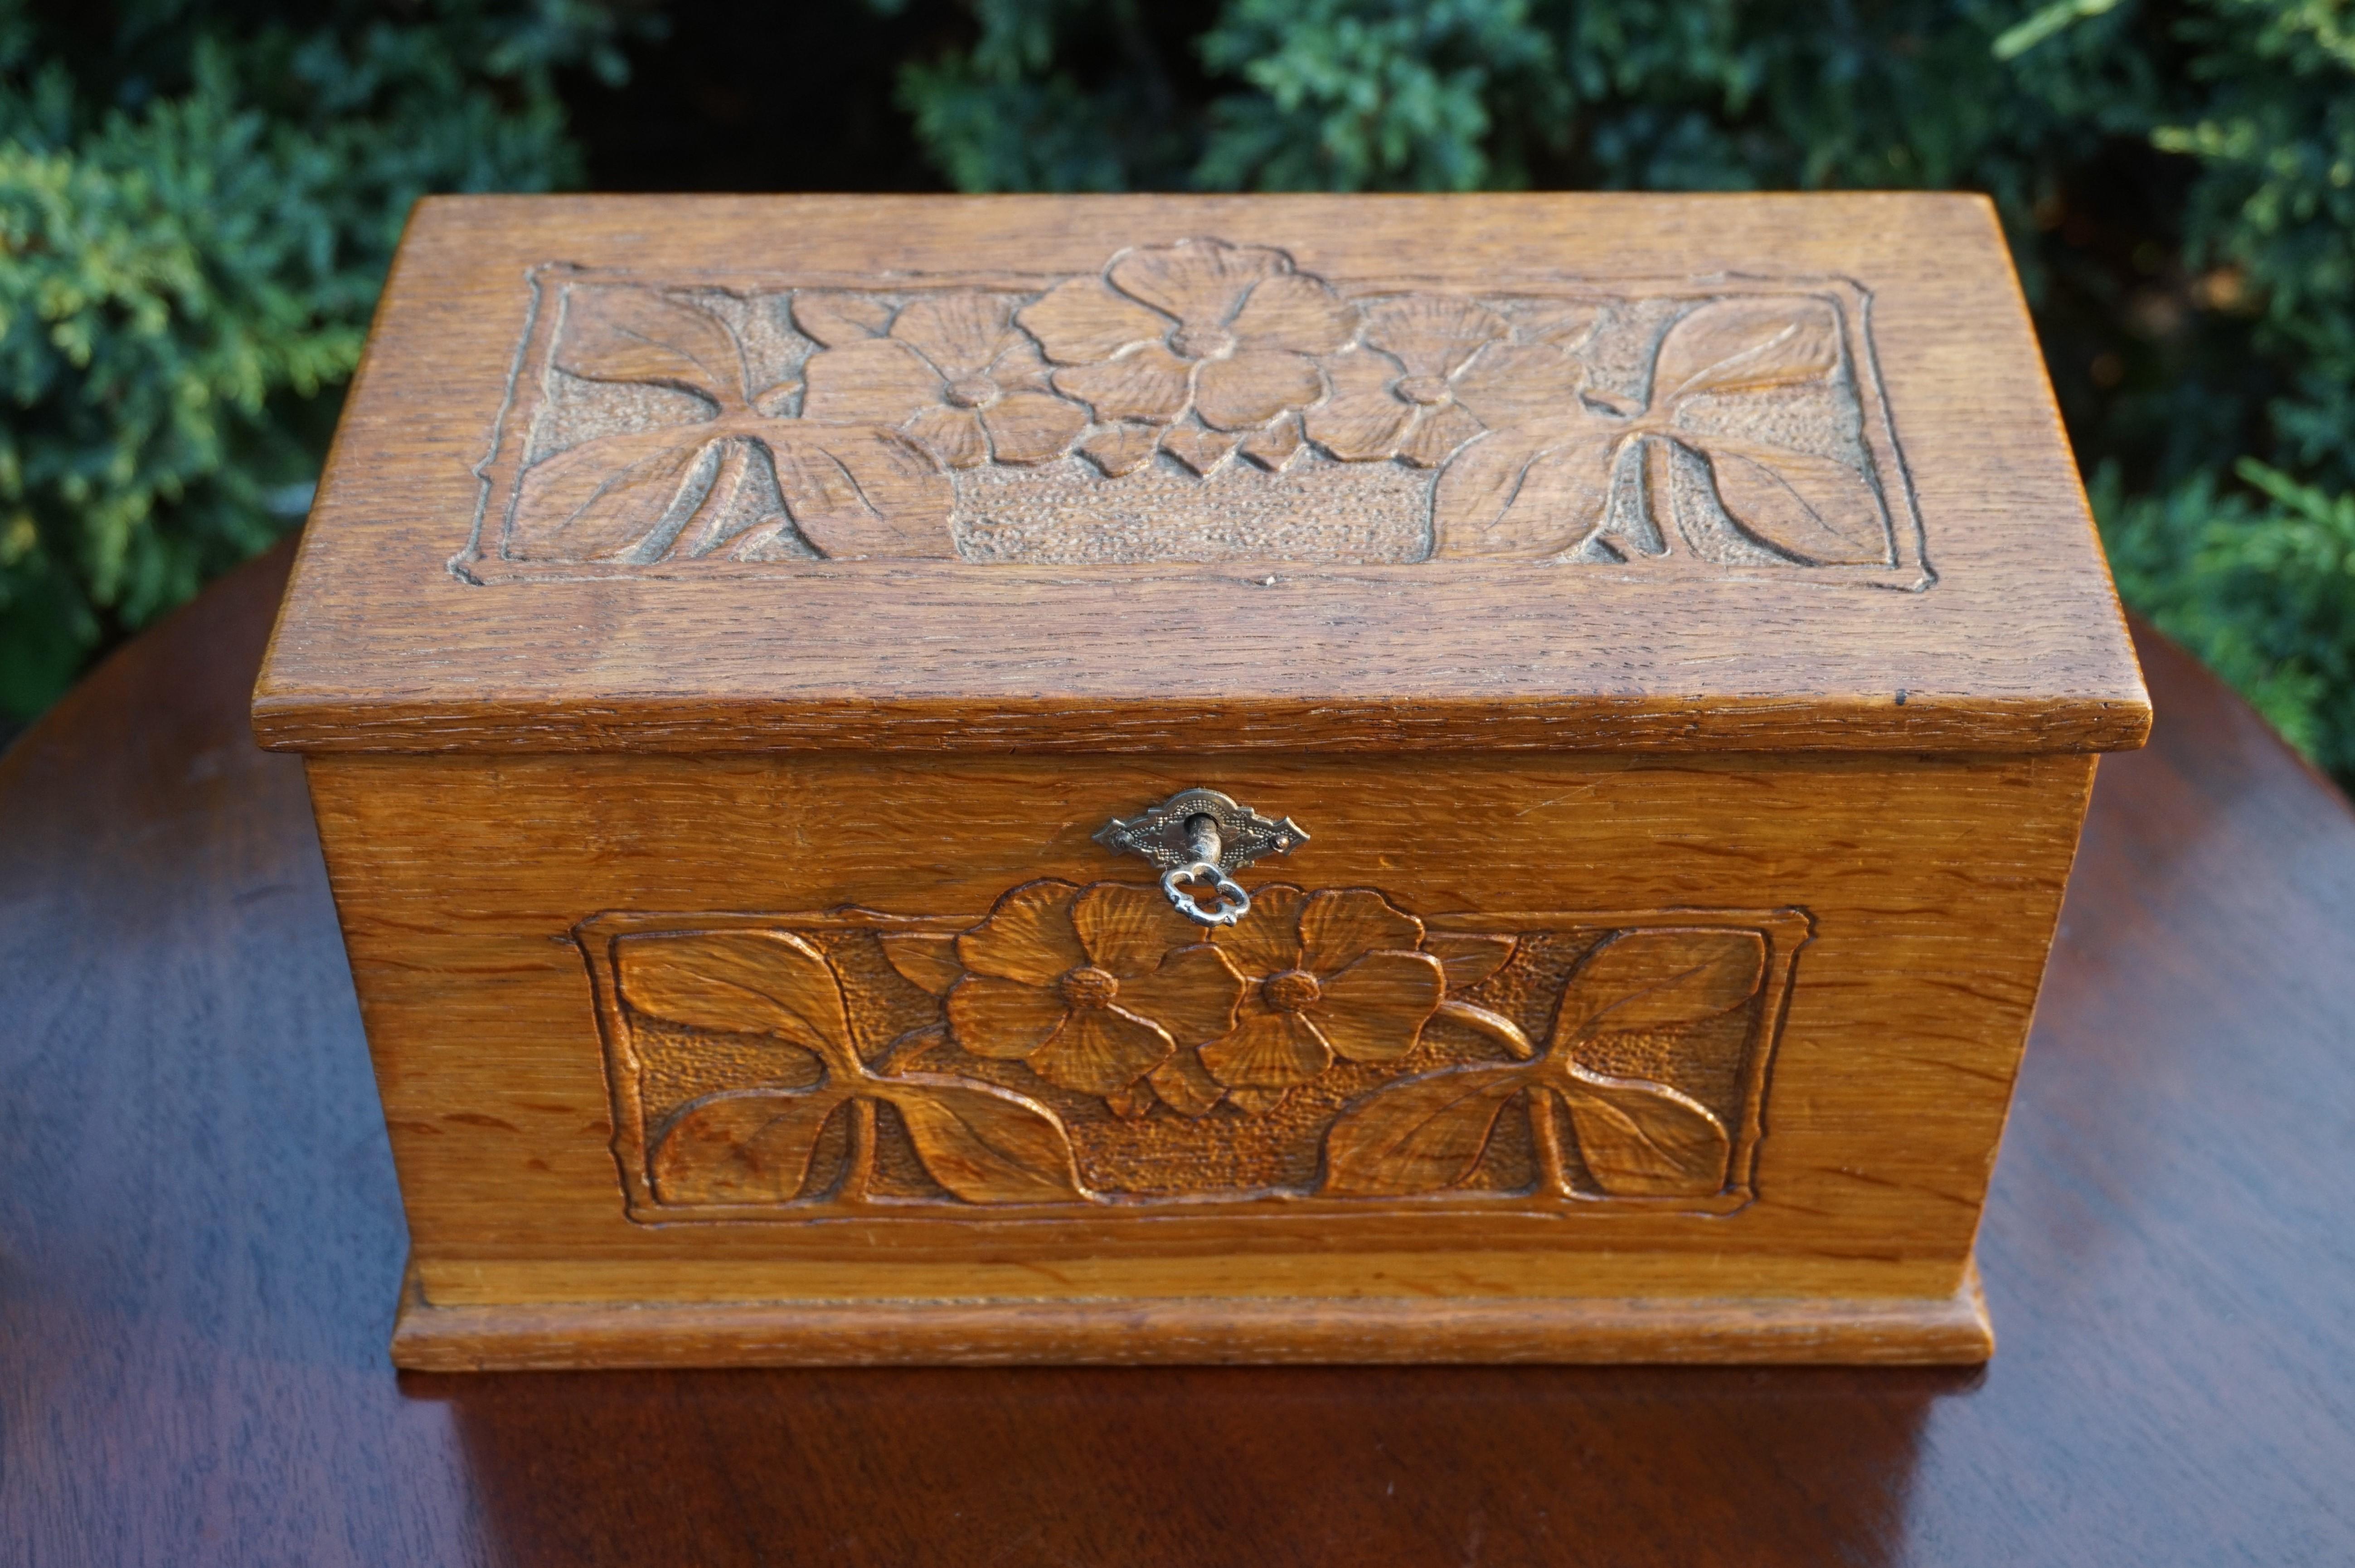 Antique and Unique Arts & Crafts Oak Jewelry Box with Hand Carved Flower Decor For Sale 5